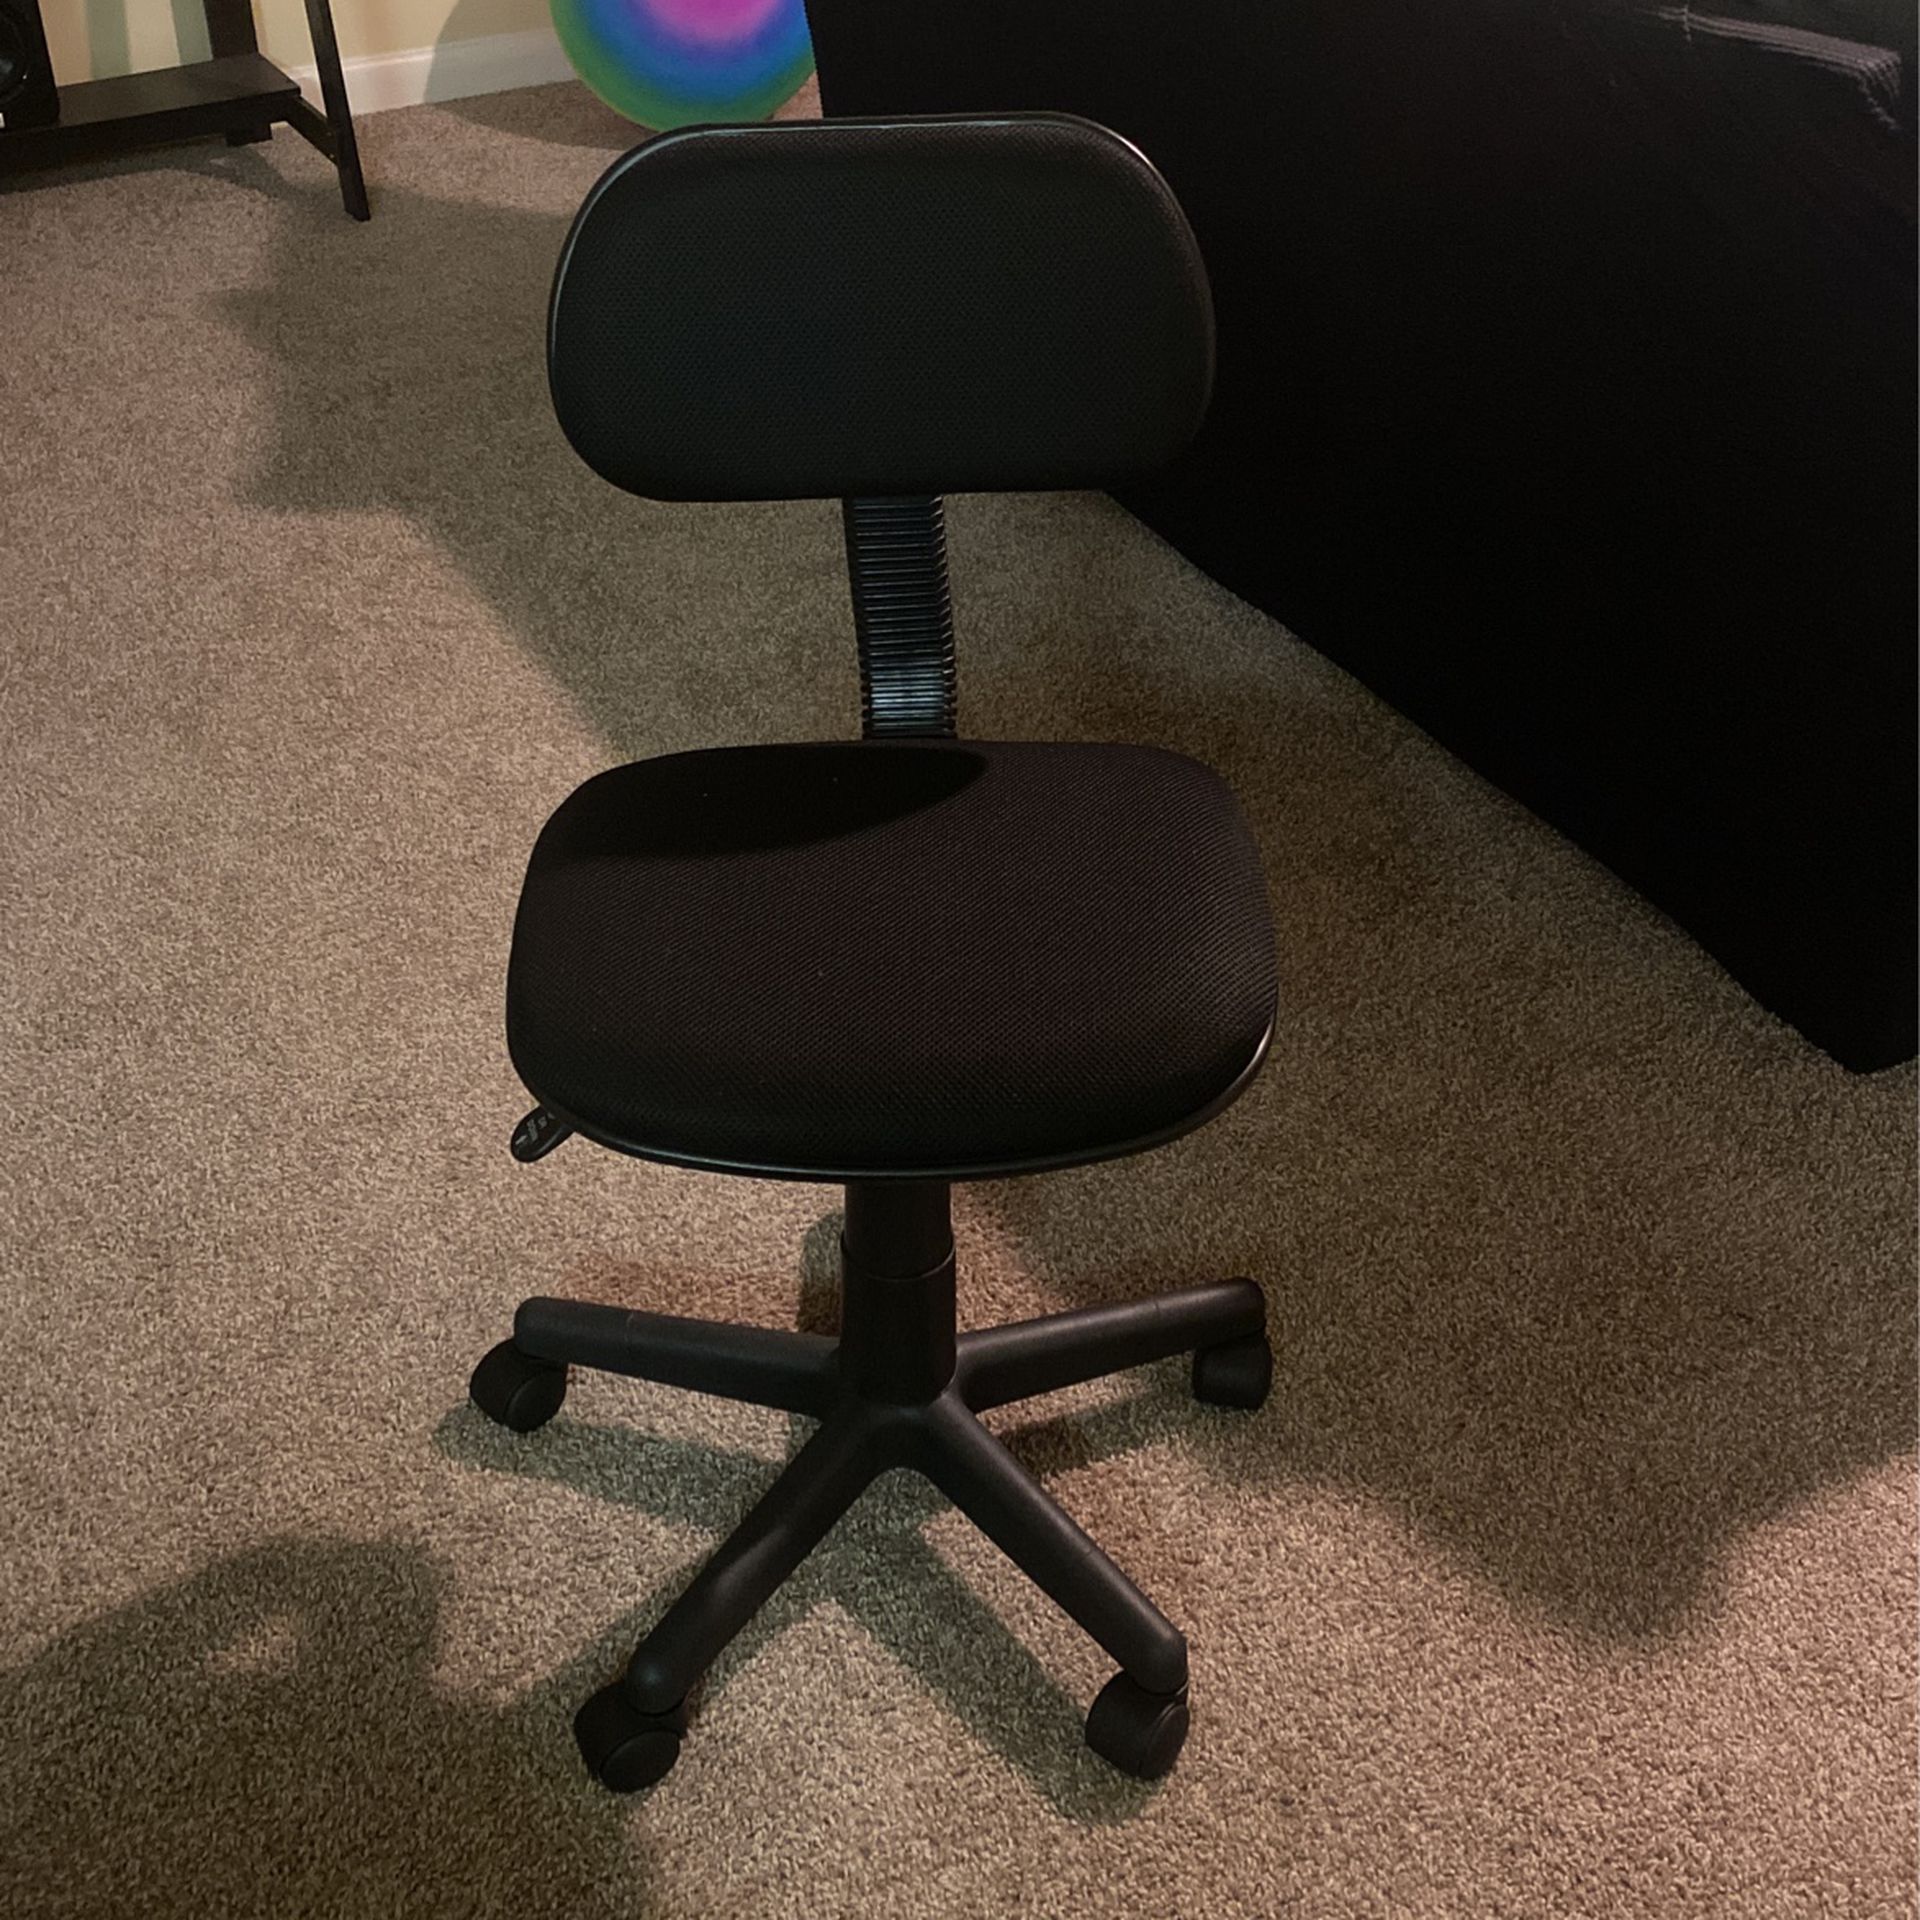 Computer Chair (selling ASAP)